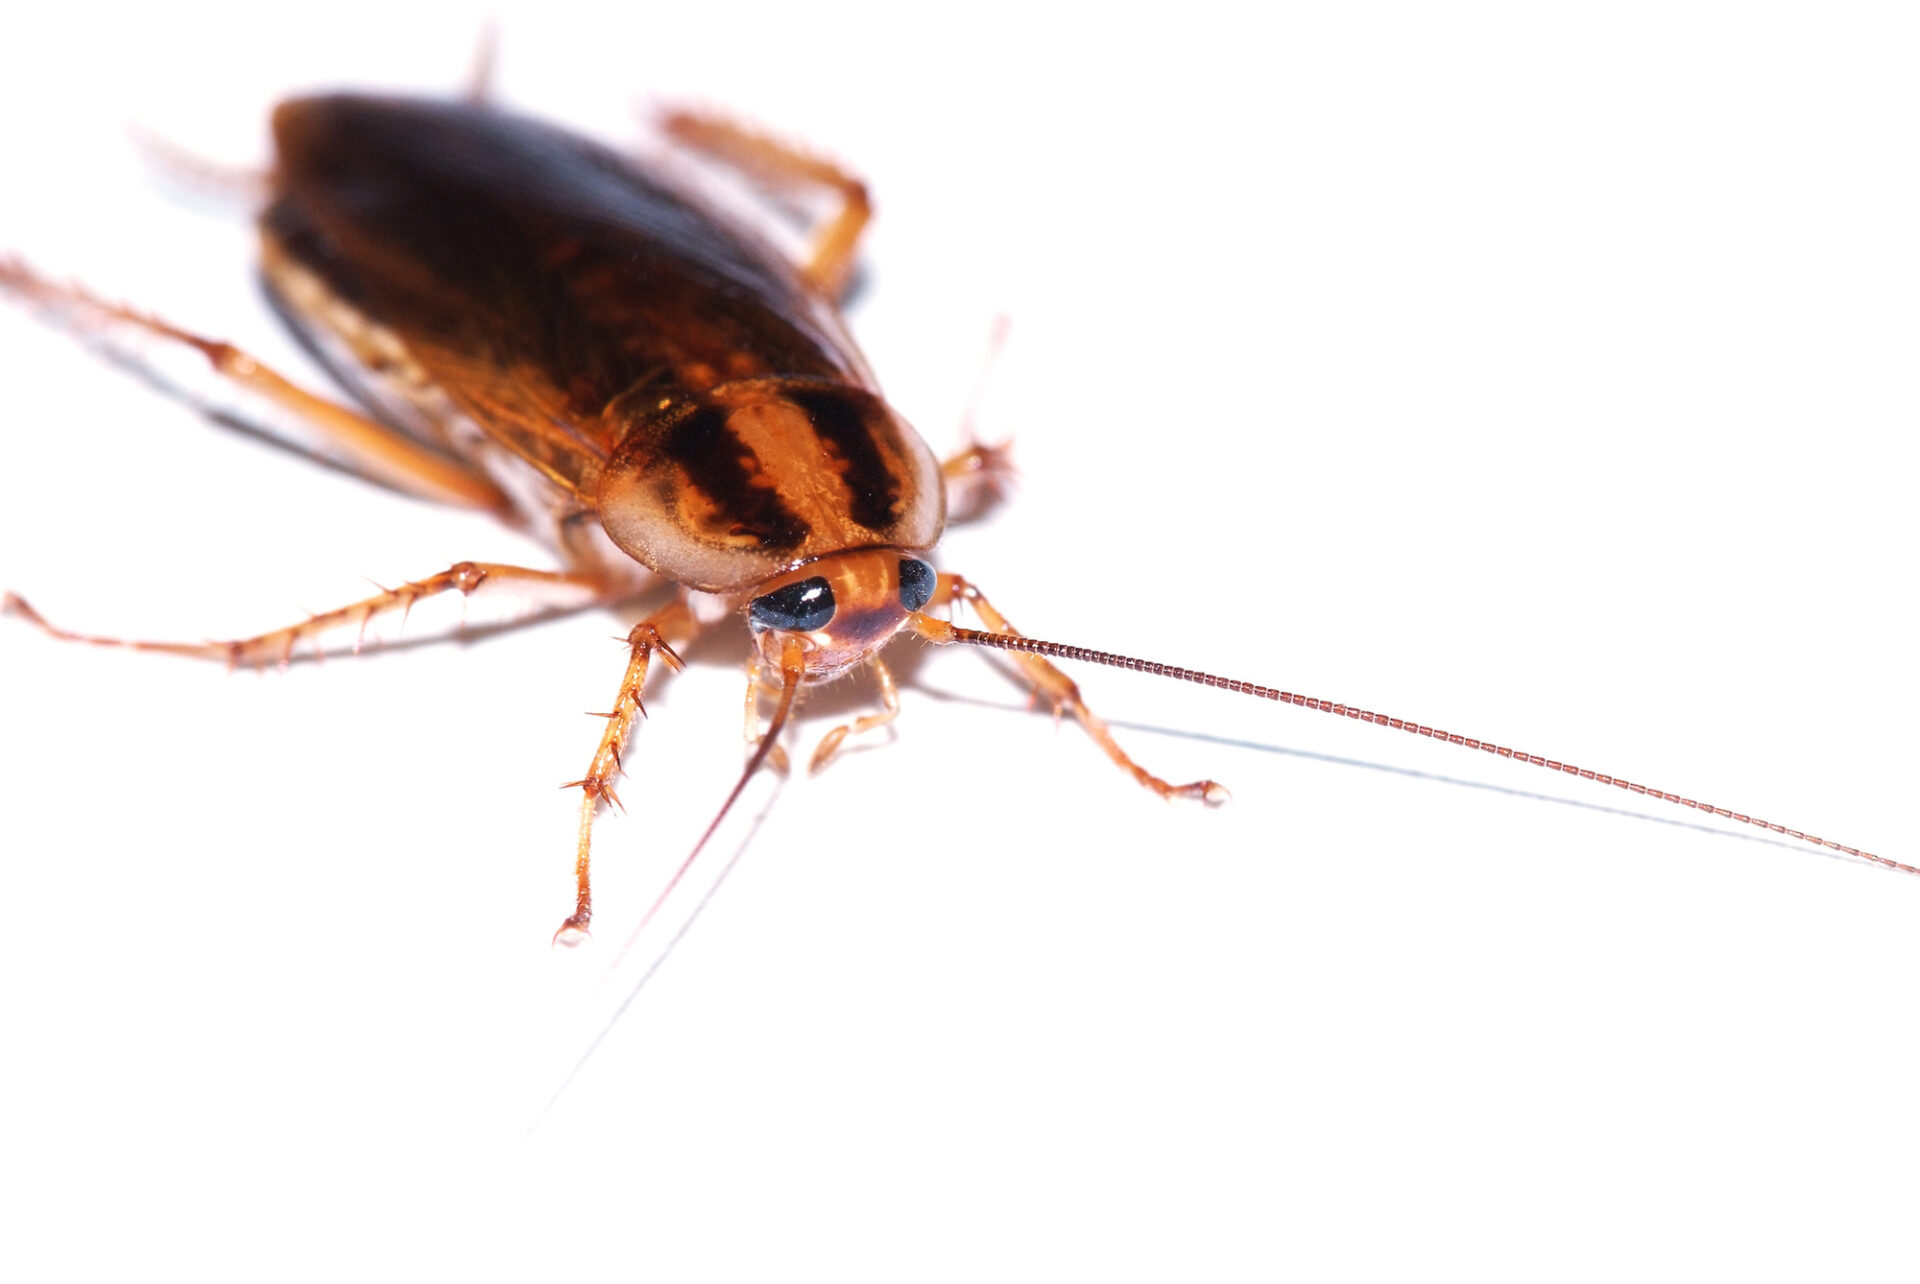 How to prevent cockroaches in your kitchen - Competitive Pest Control